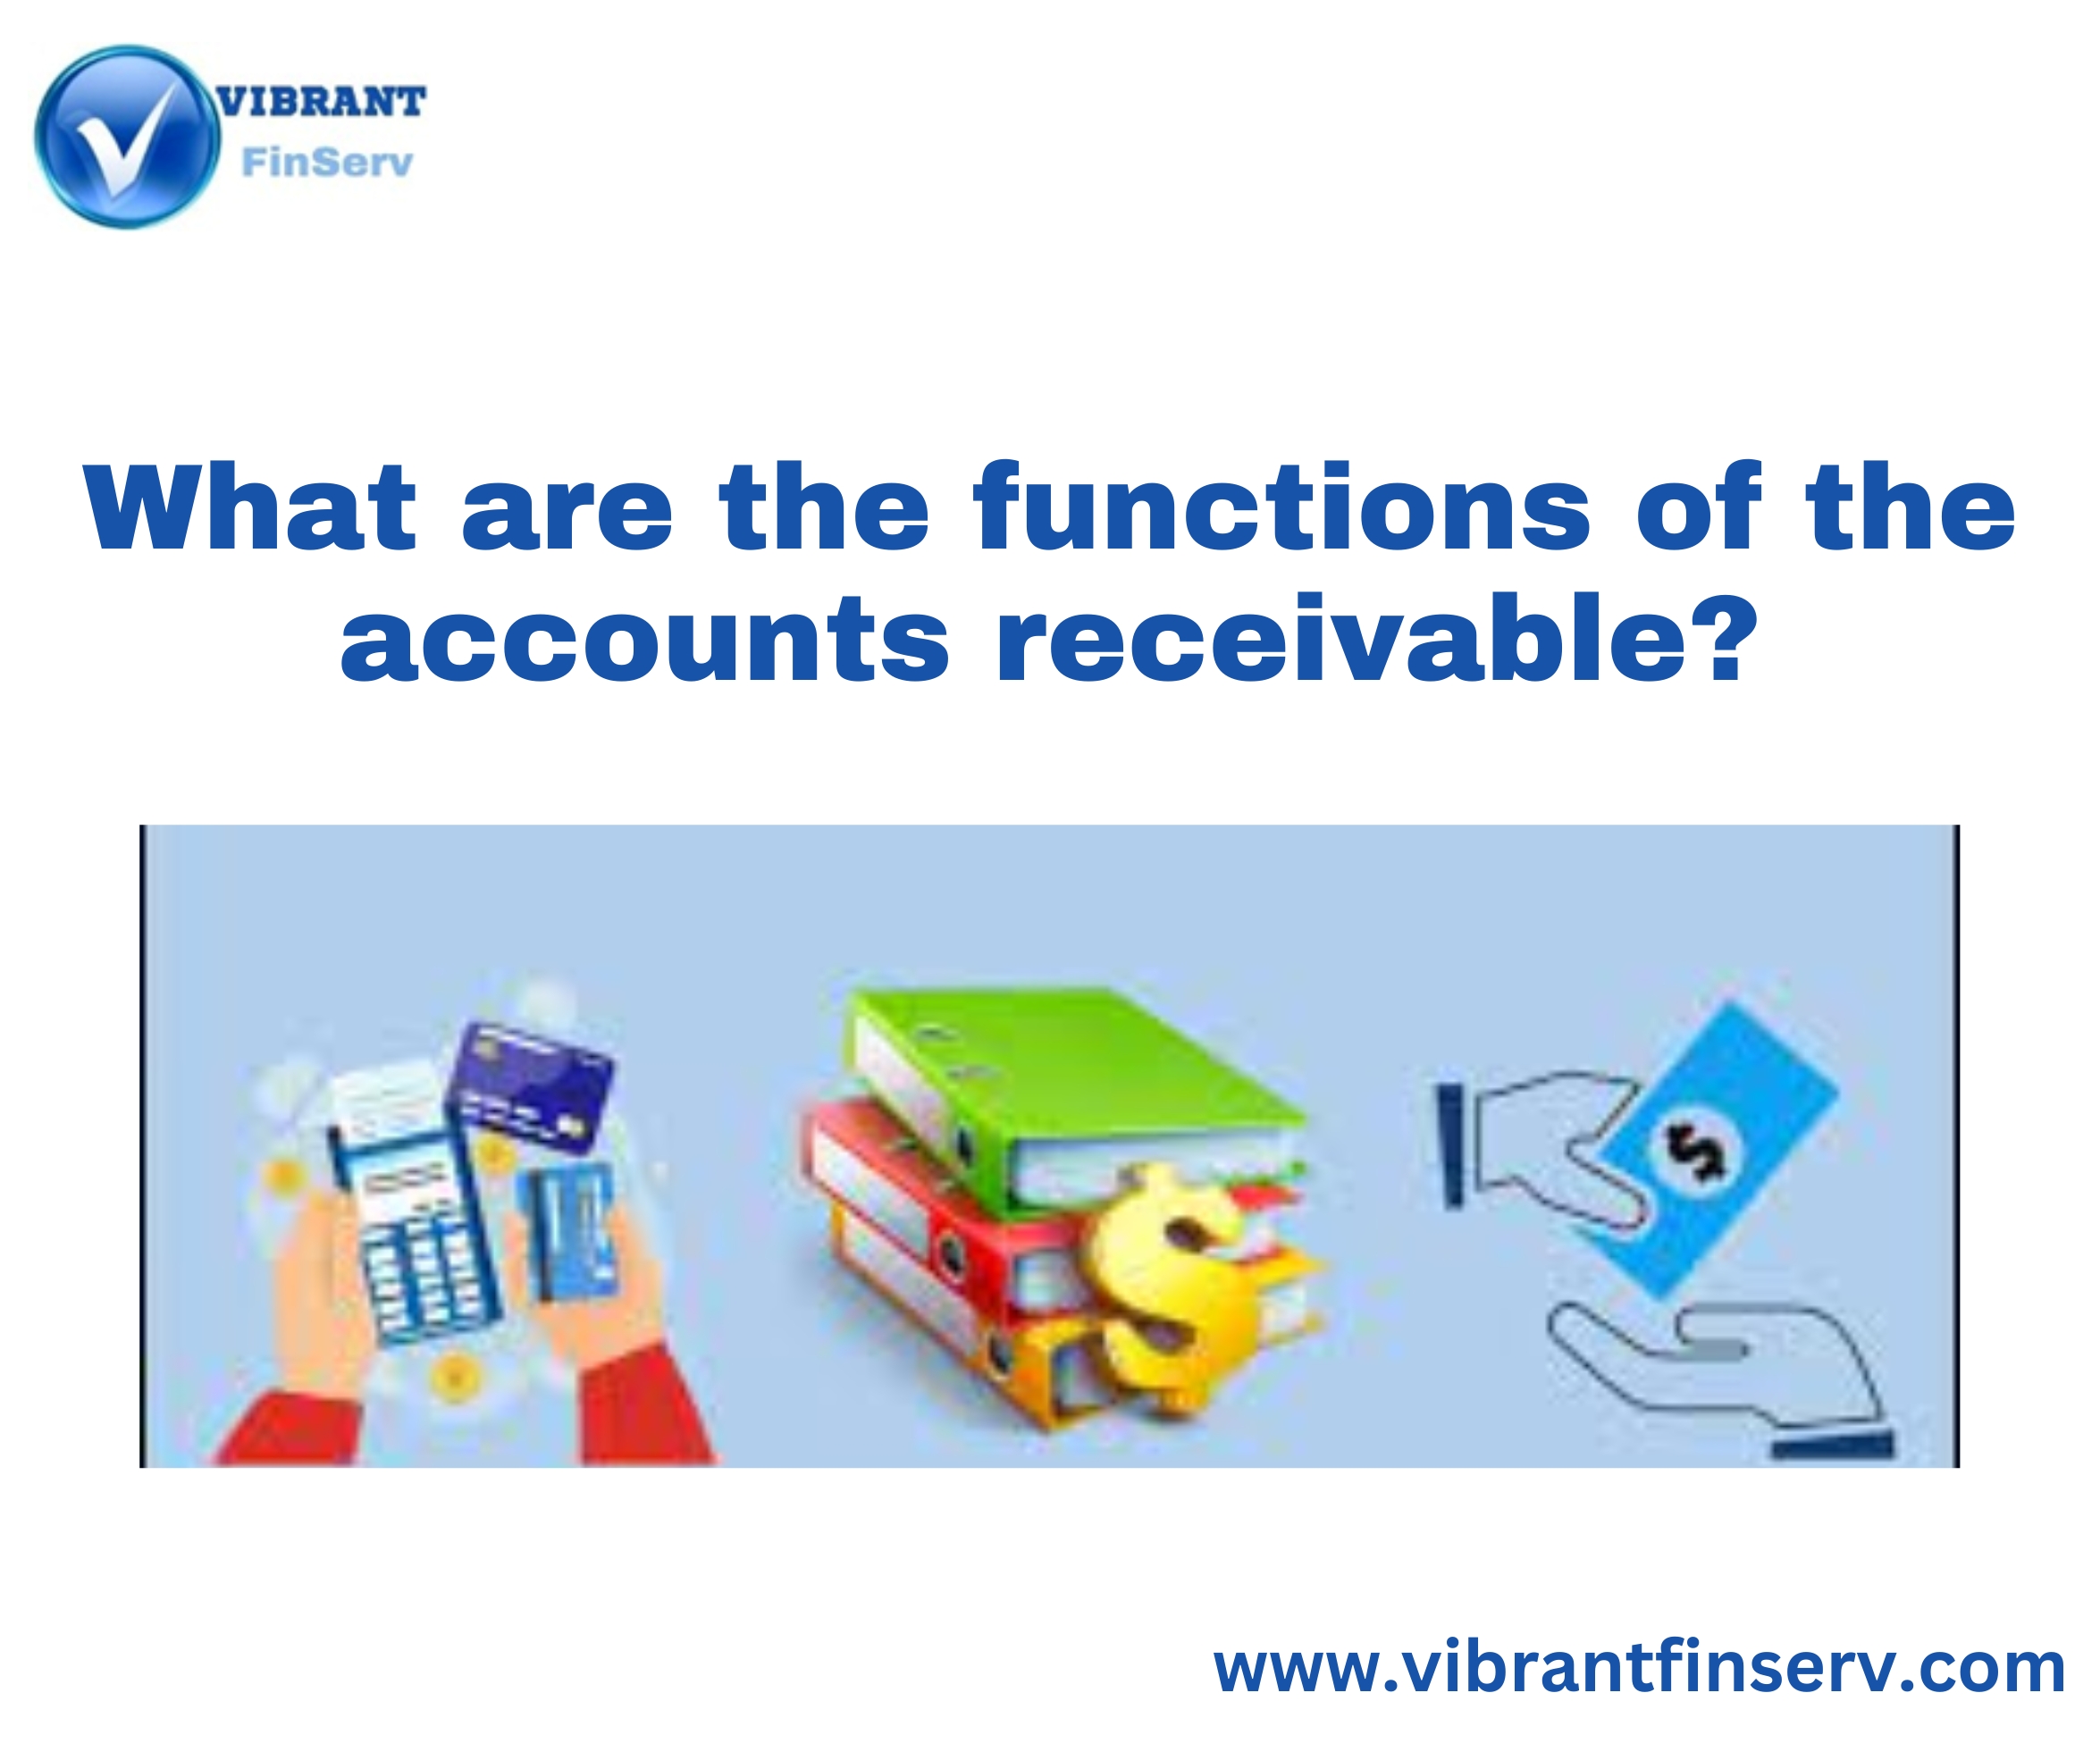 Functions of Accounts Receivable